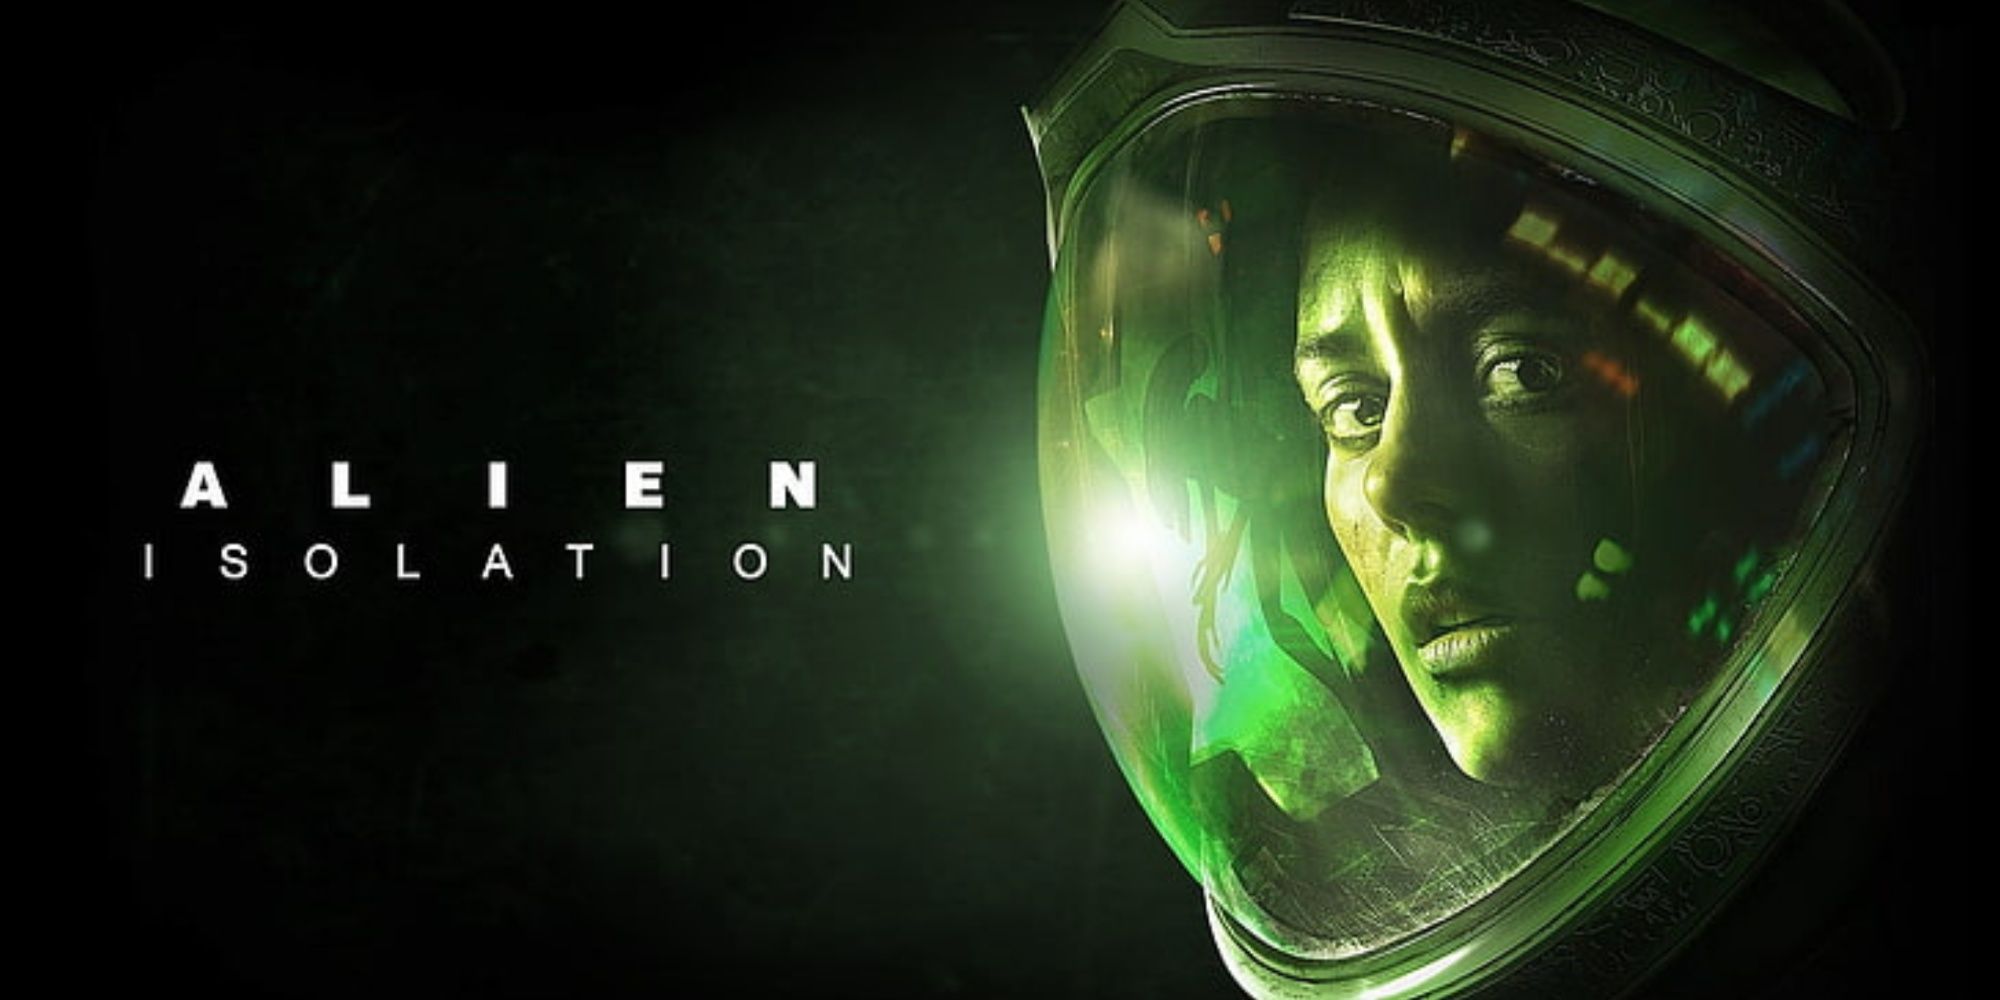 Alien: isolation cover art featuring protagonist